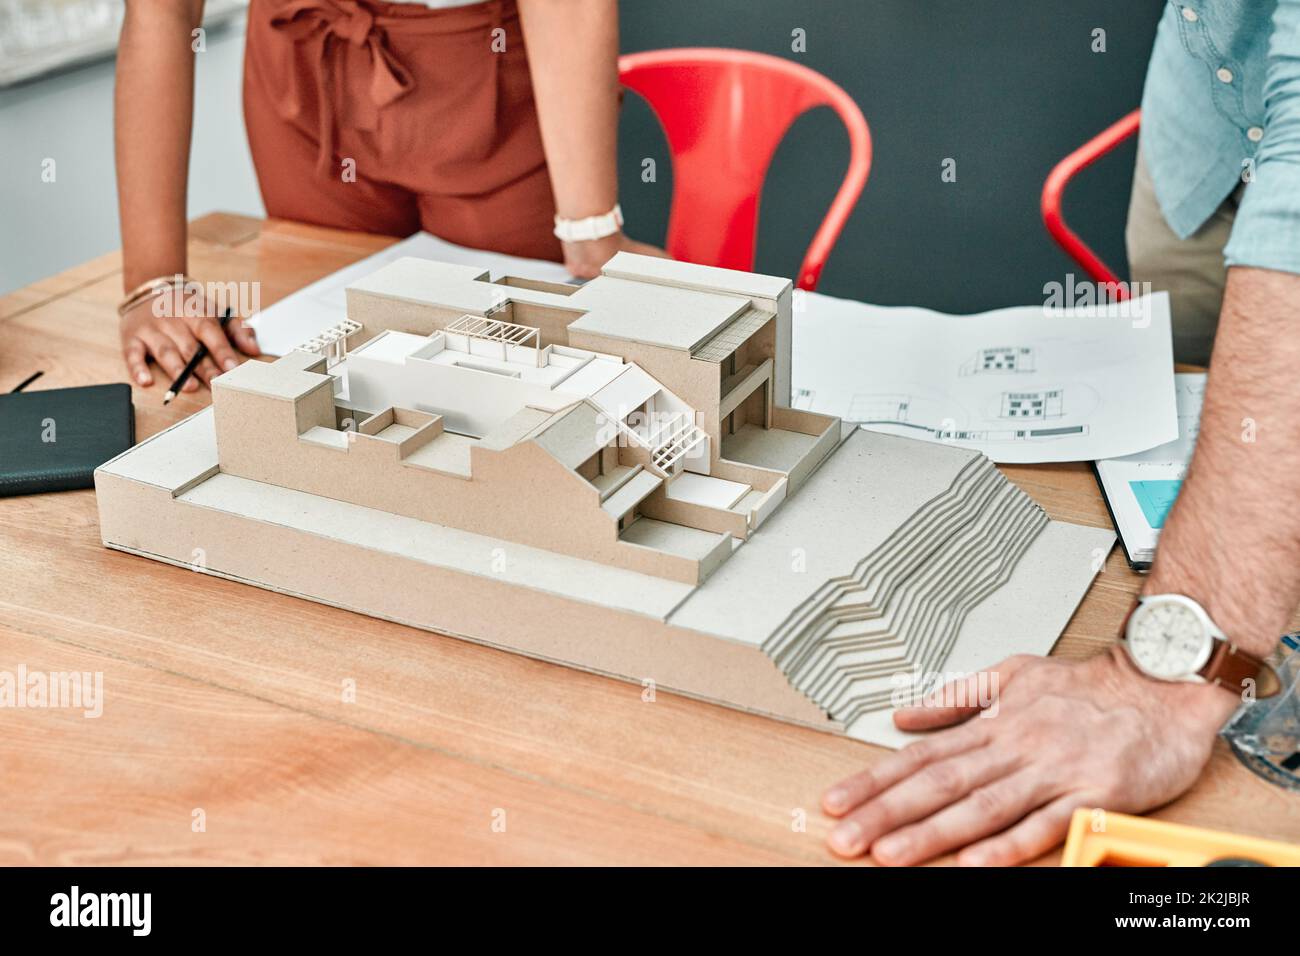 Designing their dreams is part of the job. Closeup shot of two architects working together on a scale model of a building in an office. Stock Photo